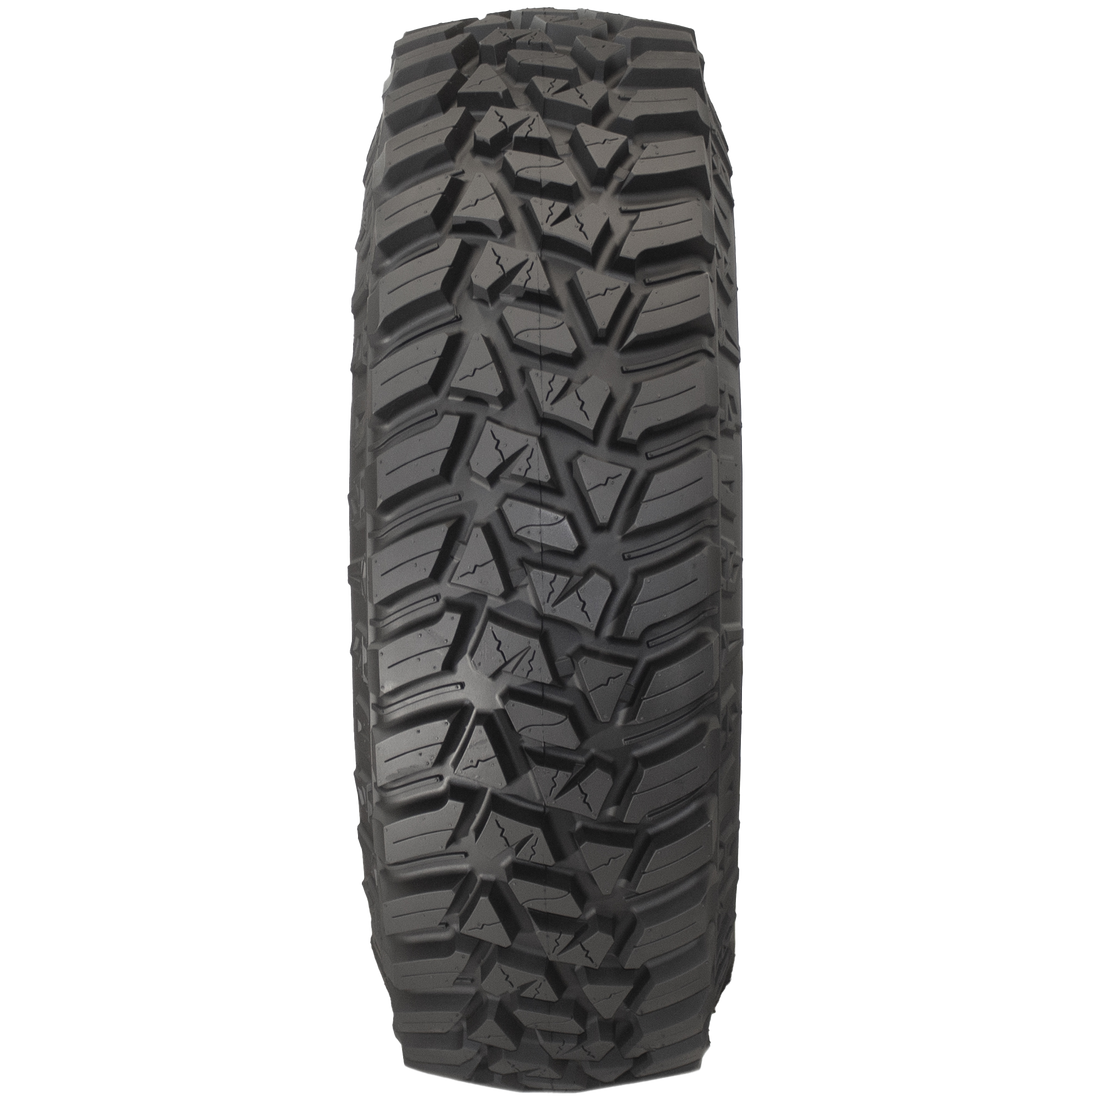 Full frontal view of the Parallax UTV tire, displaying its full-coverage, sharp, defined tread blocks that claw away at the terrain, and heavy-duty knob siping throughout the tread for extra gripping power, light truck-style tread for excellent traction on slick surfaces.